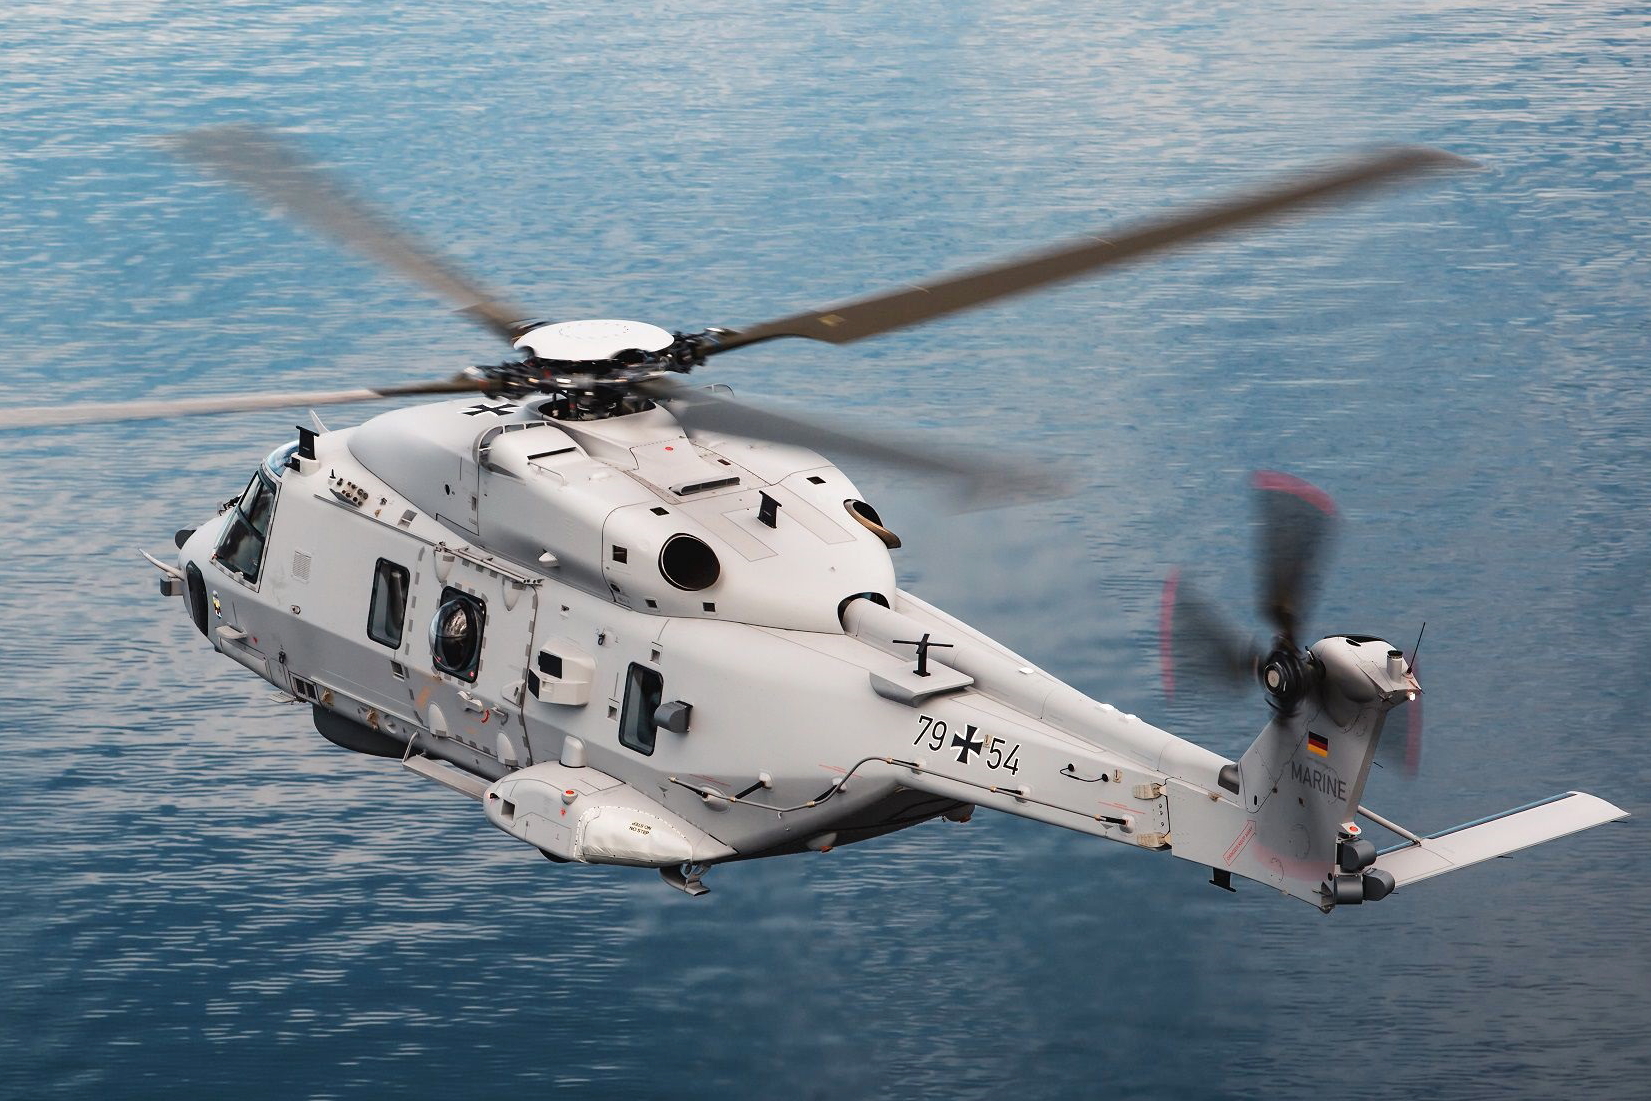 In addition to reconnaissance and transport, the shipborne Sea Tigers missions include engaging targets above and below the surface. For this purpose, the Sea Tiger is, amongst others, equipped with an active dipping sonar, passive sonar buoys, and weapons (torpedoes and missiles). Picture Airbus Helicopters - Patrick Heinz. Click to enlarge.